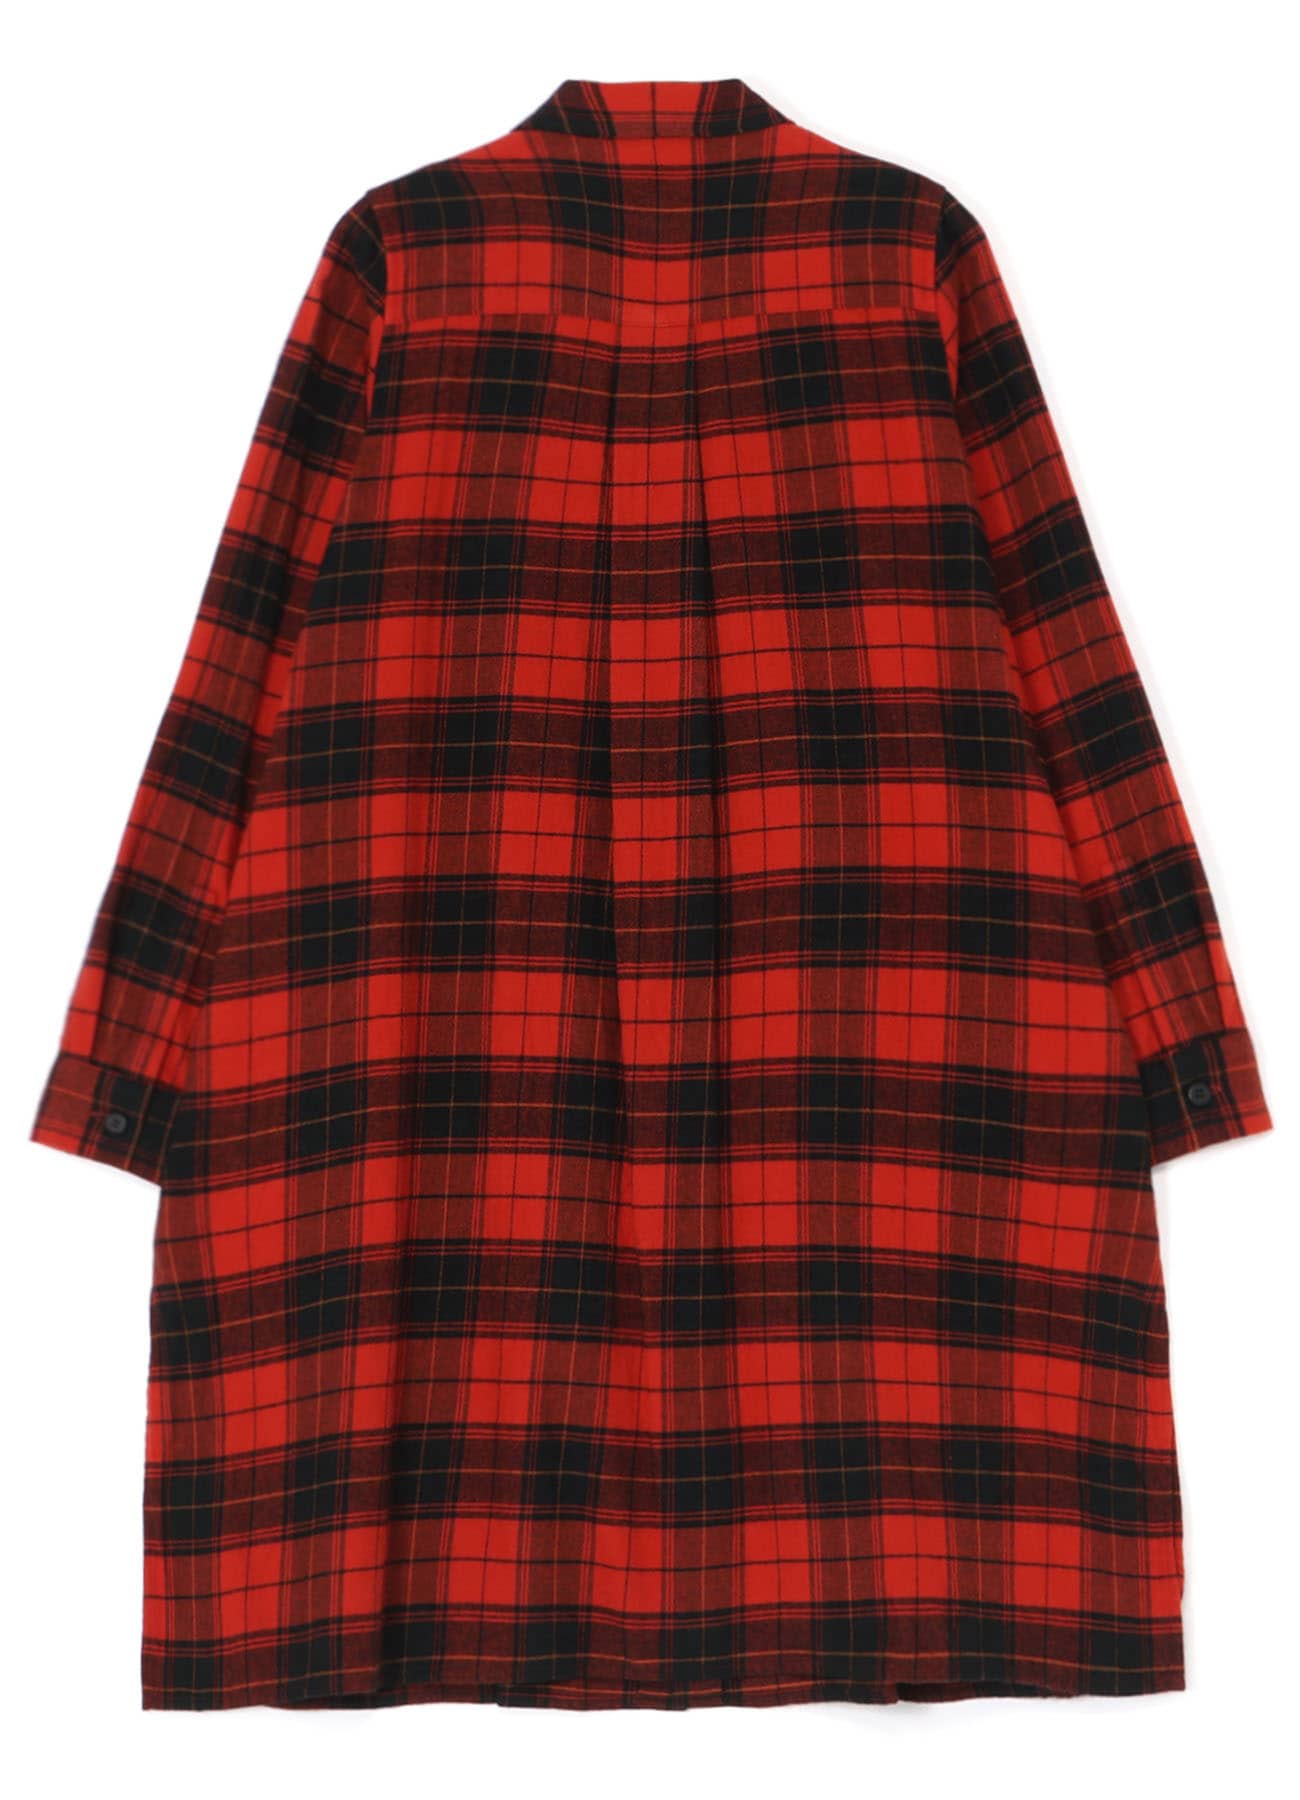 PLAID FLANNEL SHIRT WITH FRONT PLEATS